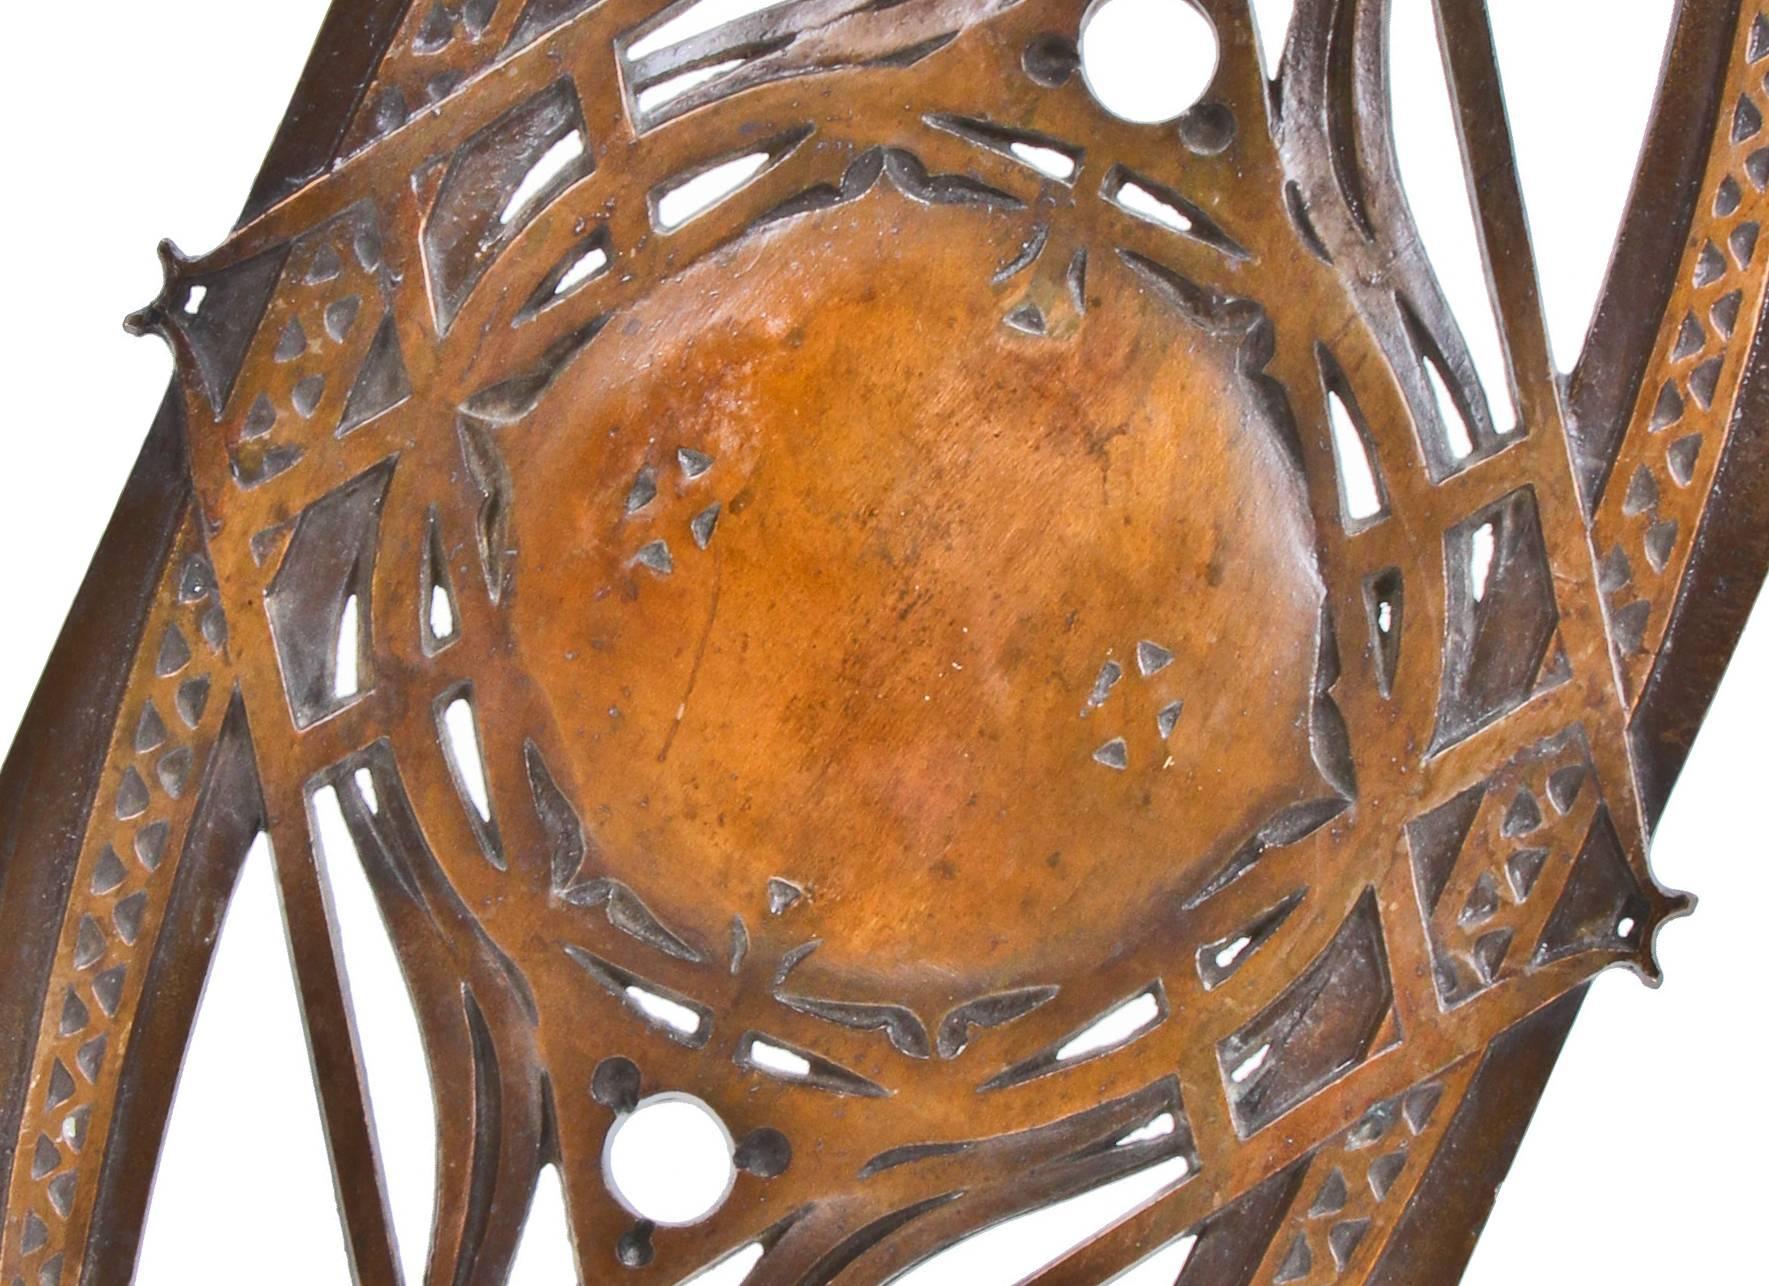 Original 19th century historically important single ornamental cast iron interior staircase baluster salvaged from the Chicago stock exchange prior to demolition in 1972. The copper-plated panel features a strongly geometric, reticulated oval design